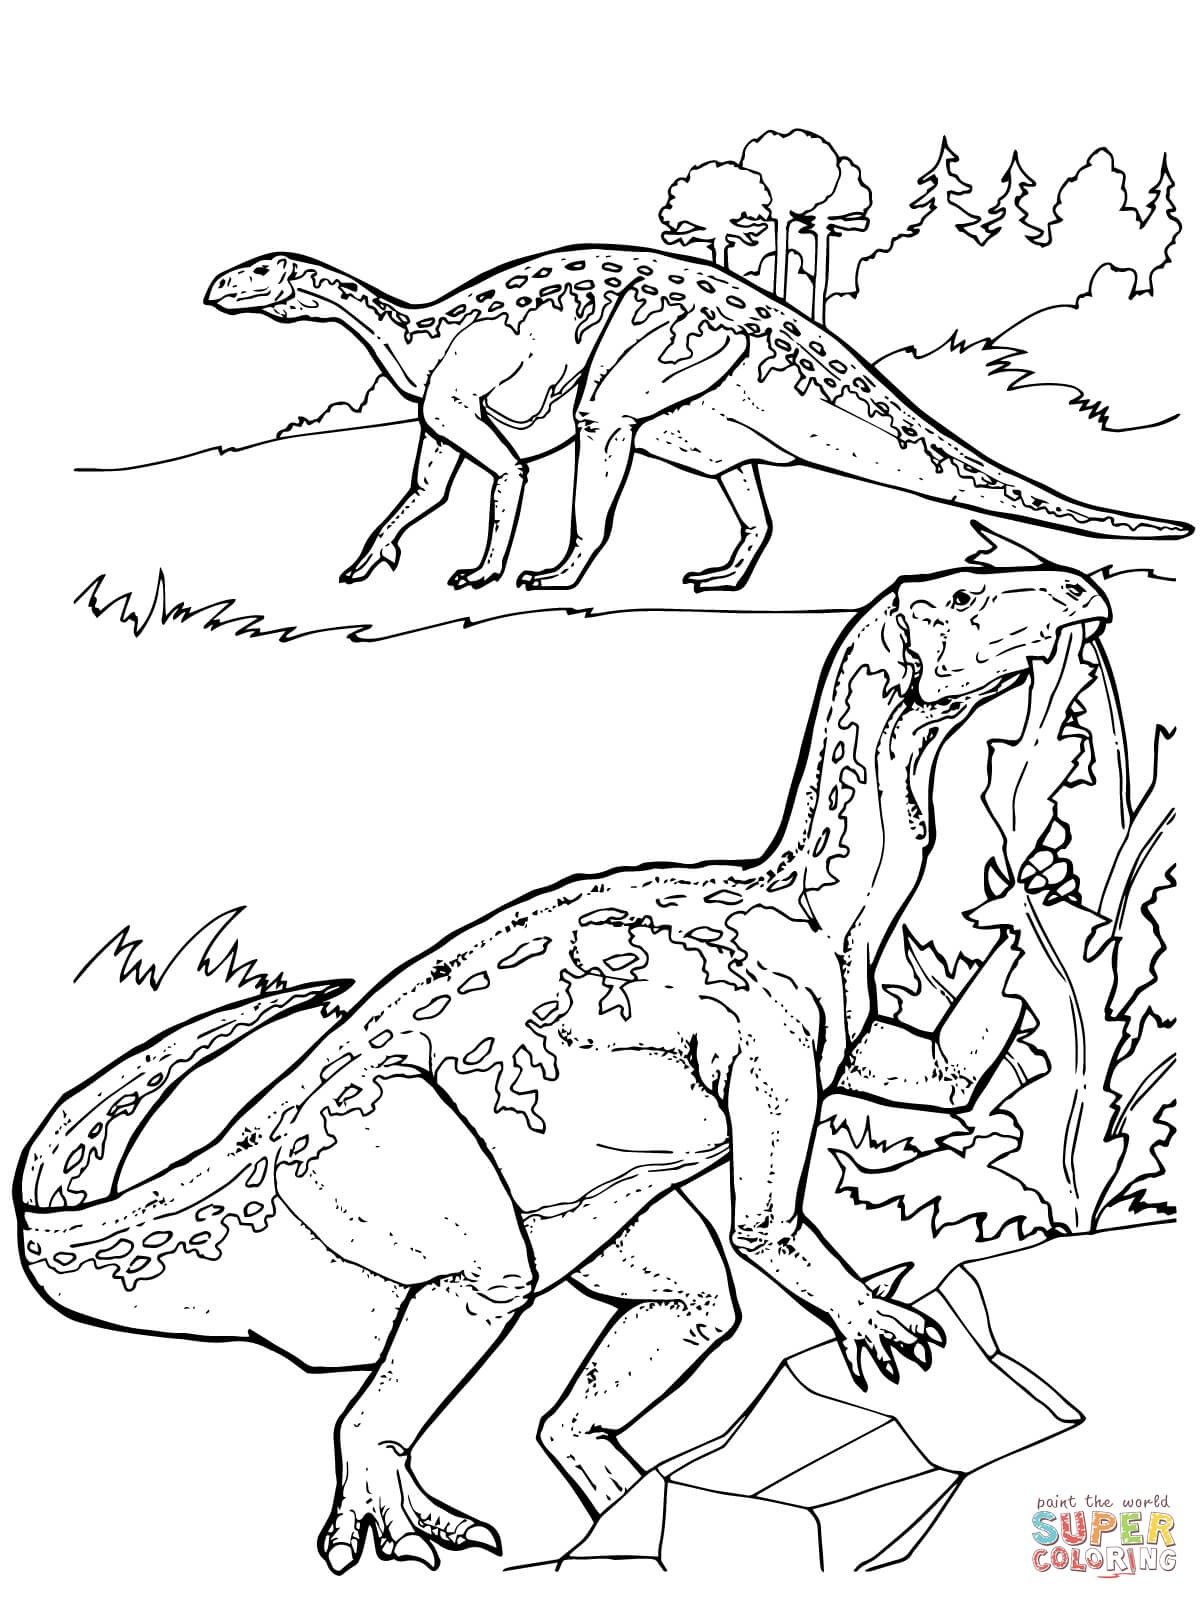 the Iguanodon Dinosaurs coloring pages